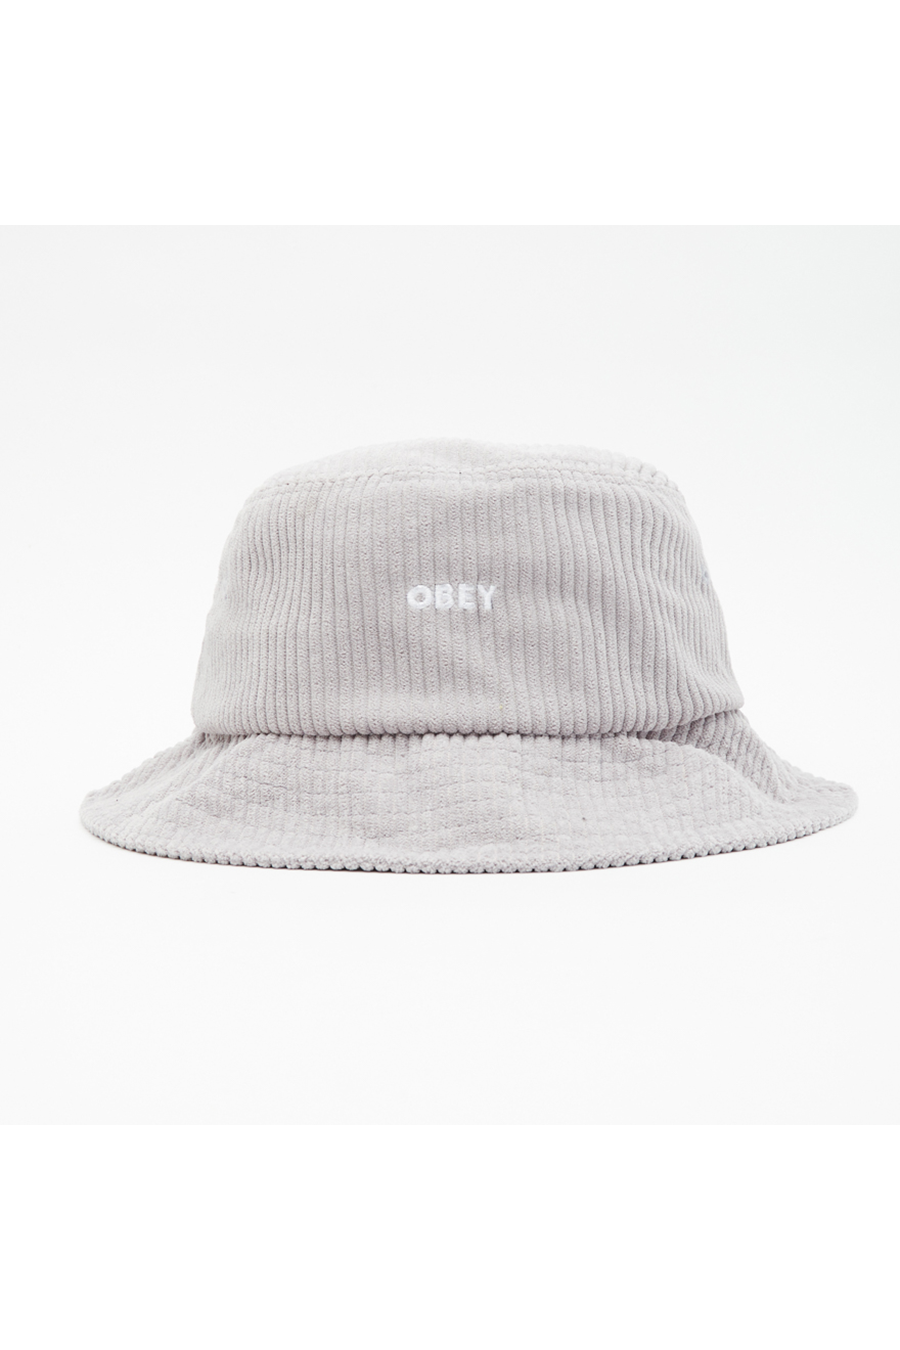 Bold Cord Bucket Hat | Purple Paste - Main Image Number 1 of 1